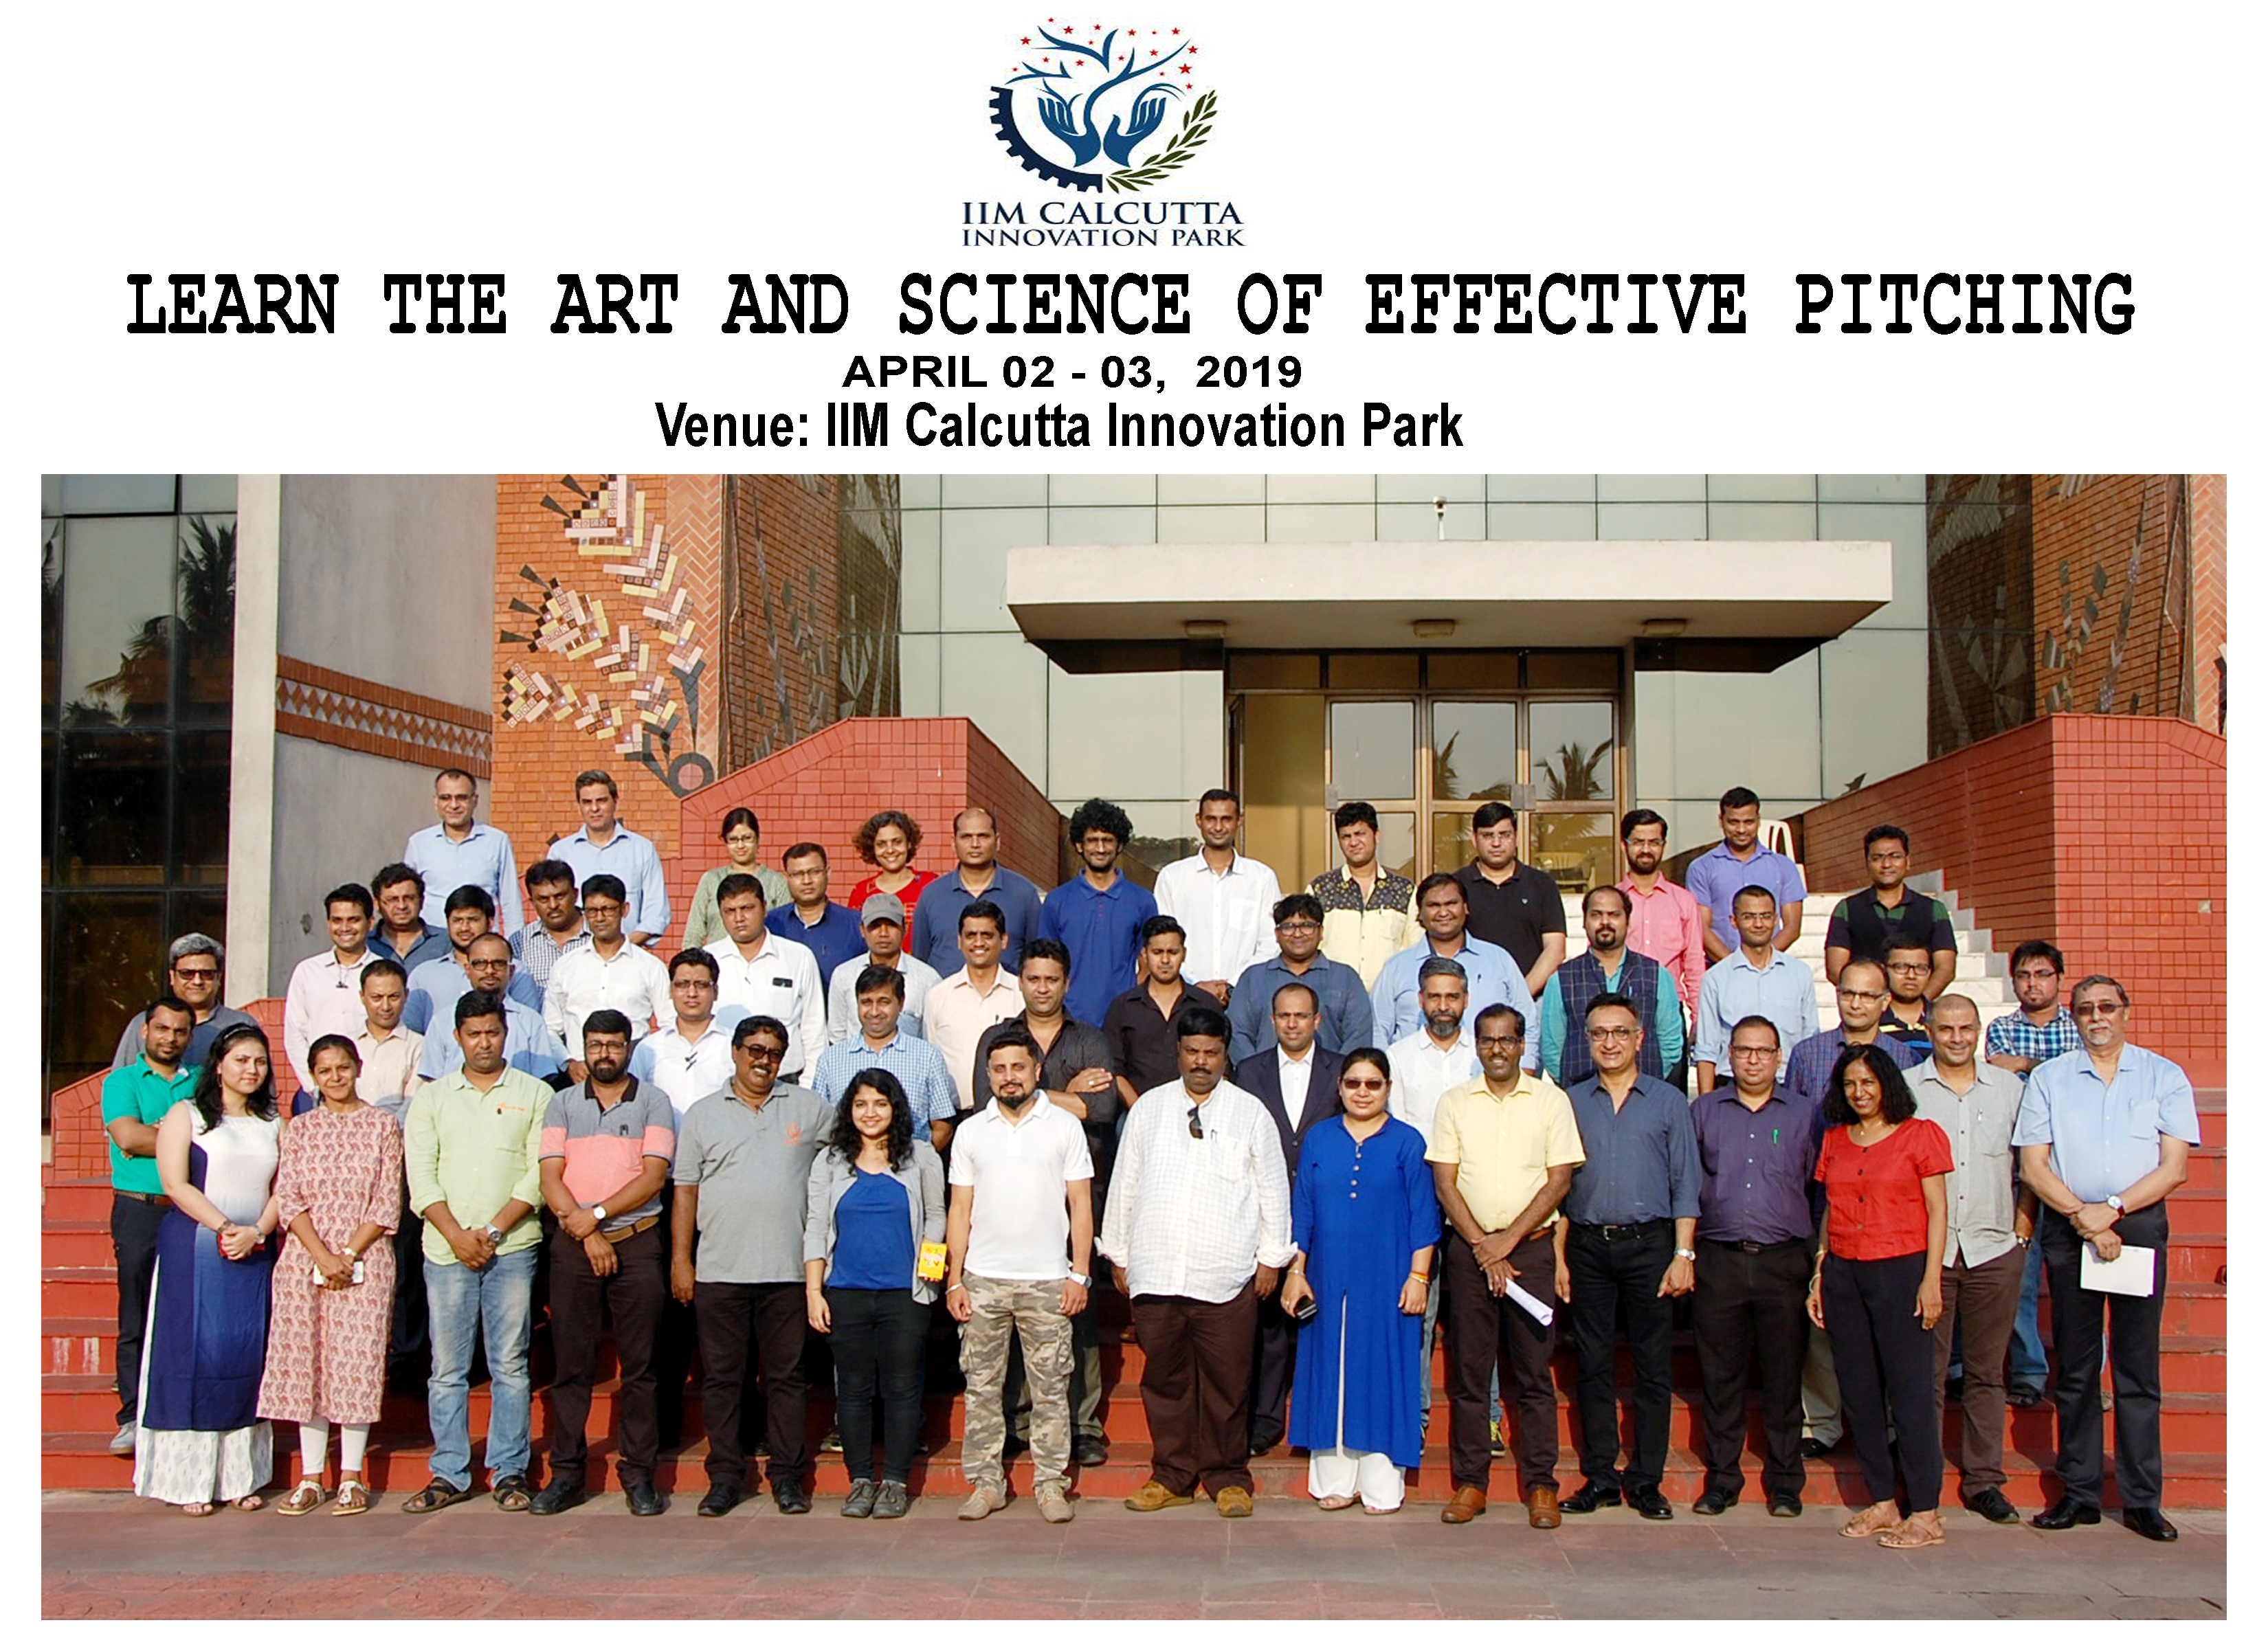 The ‘Learn the Art and Science of Pitching’ Workshop